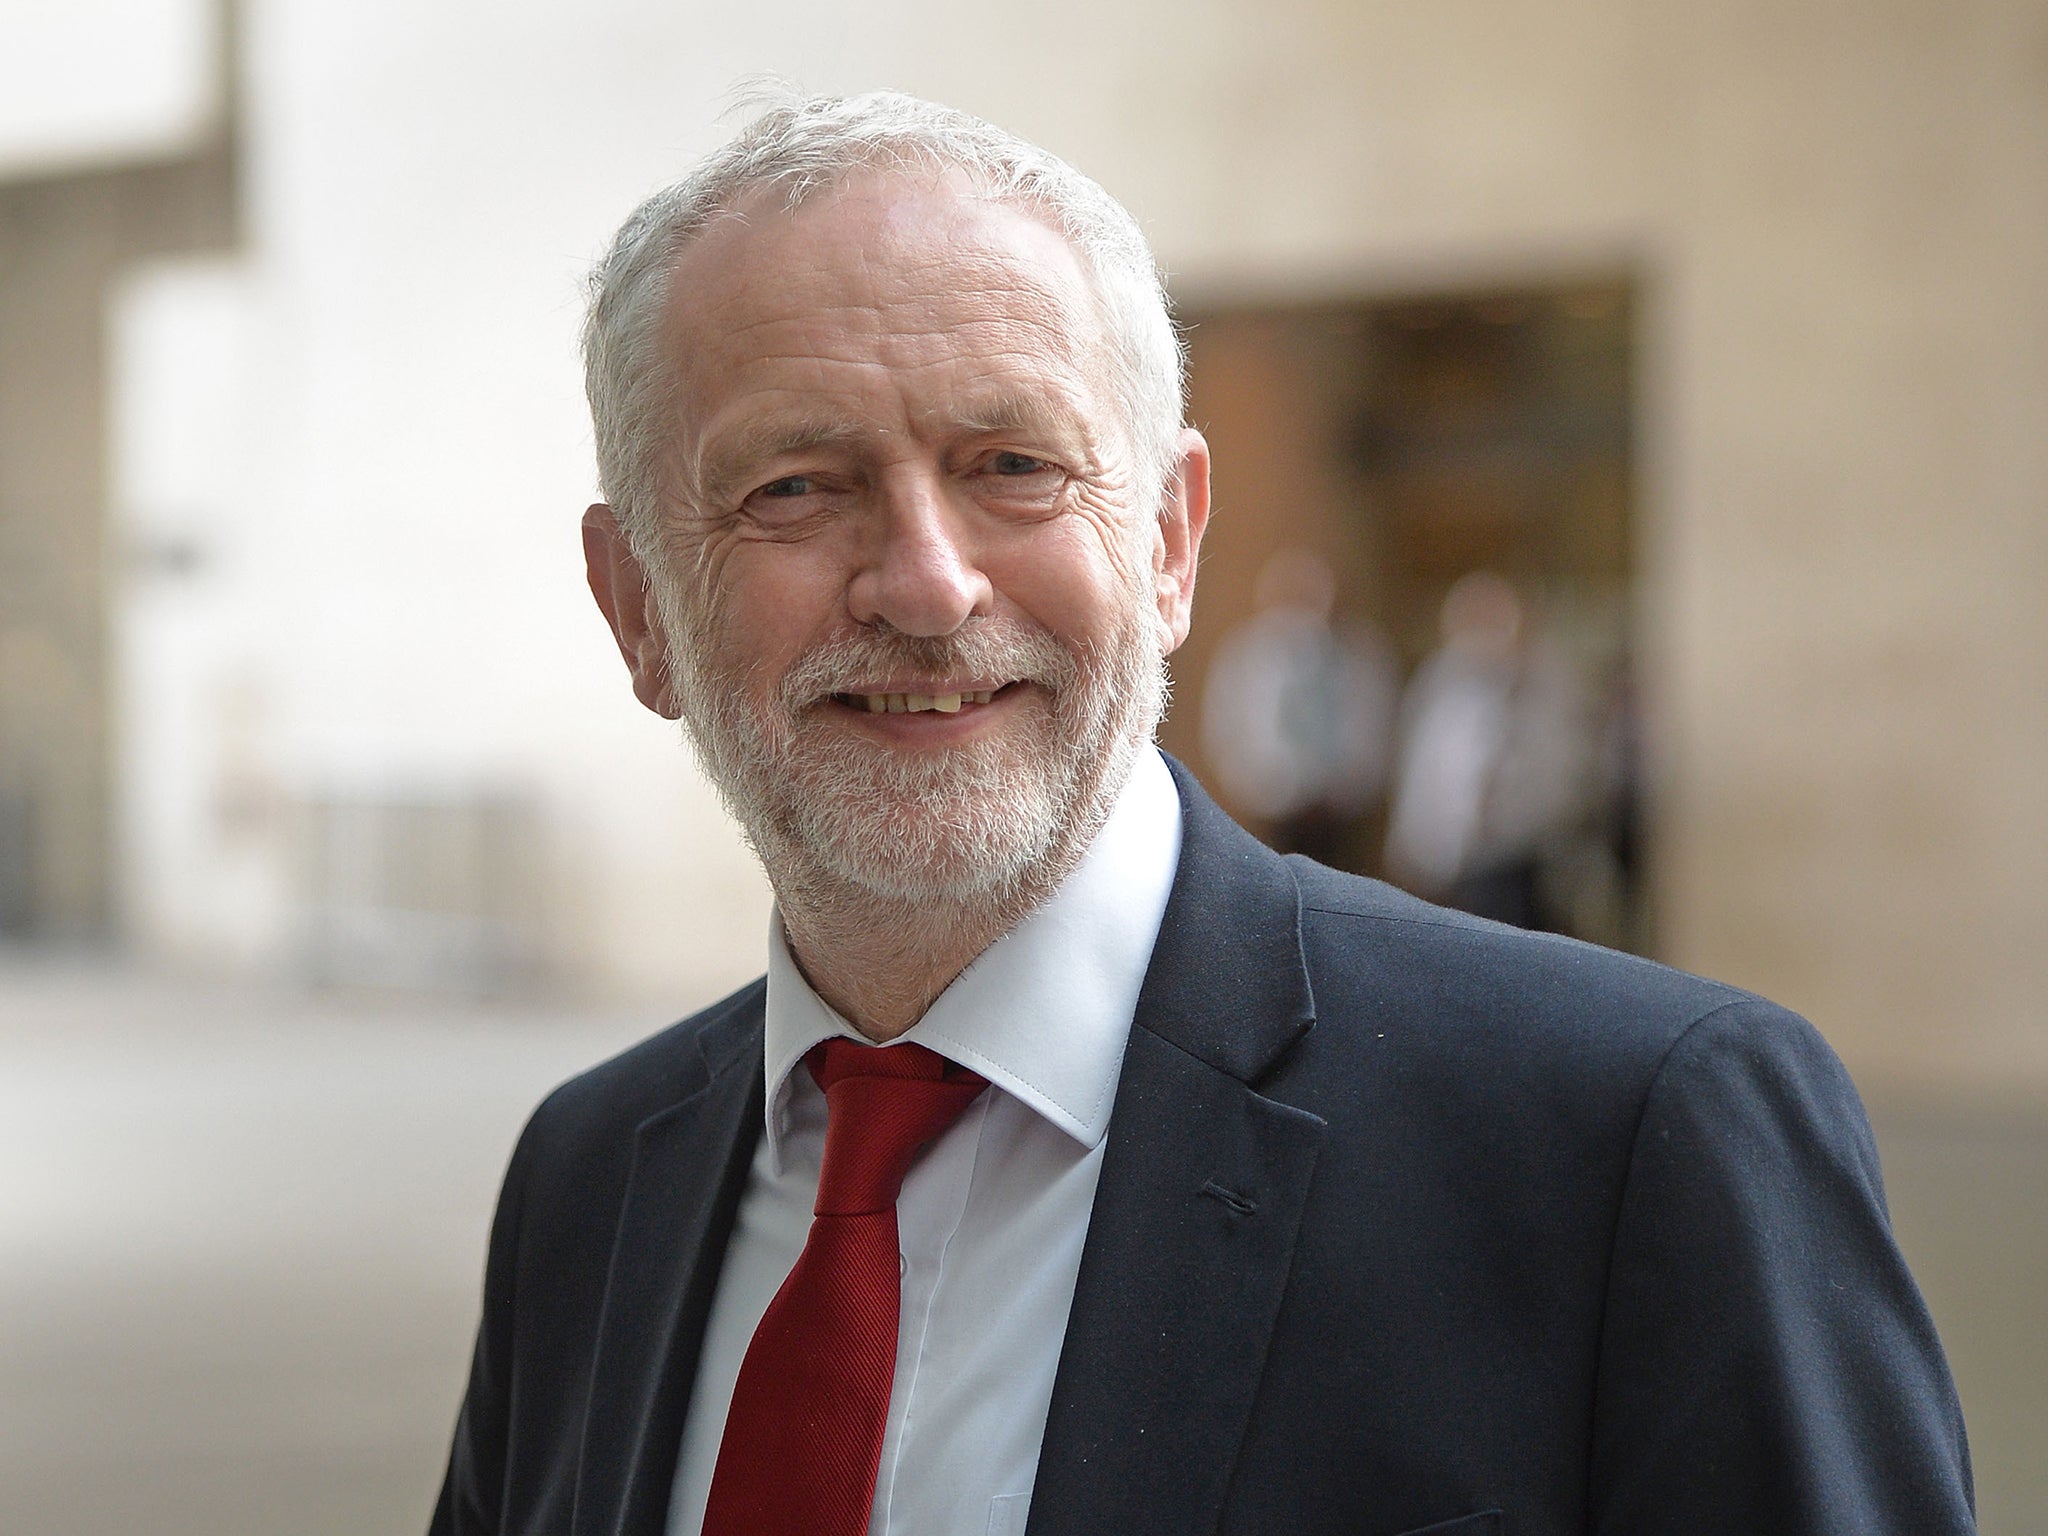 Jeremy Corbyn told MPs 35,000 new members had joined the party since Friday